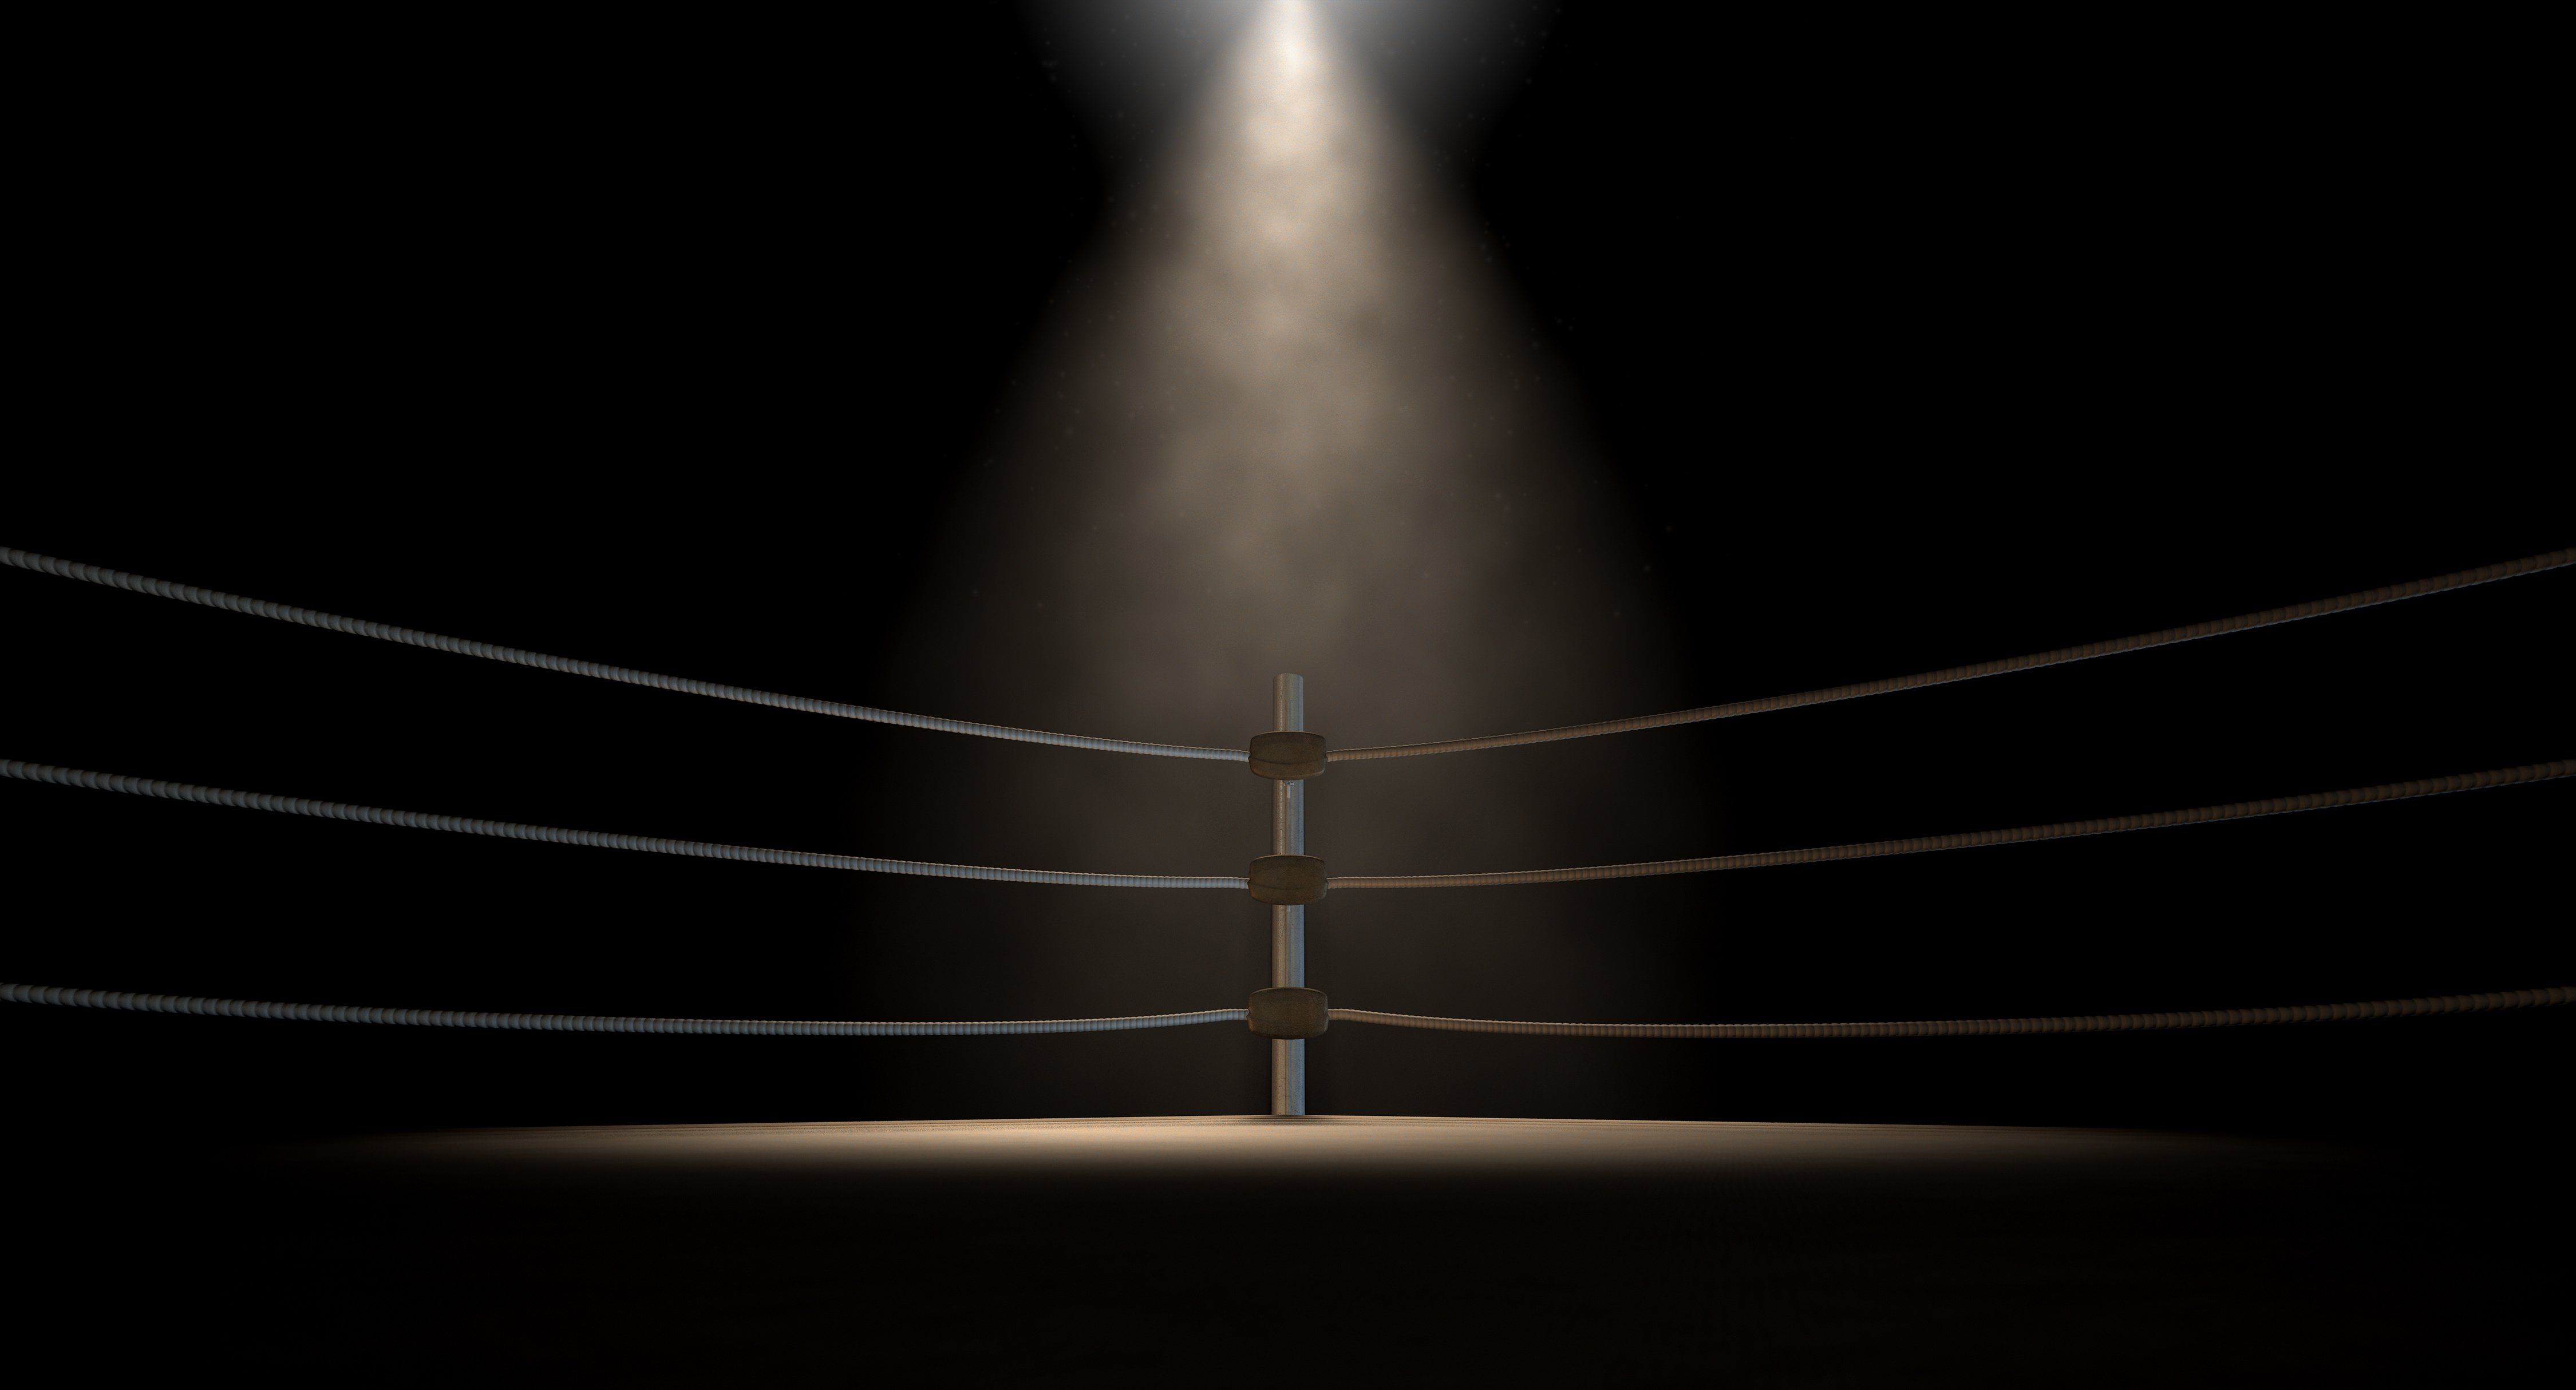 Boxing Ring Wallpapers  Top Free Boxing Ring Backgrounds  WallpaperAccess   Muay thai Thai Sunset wallpaper